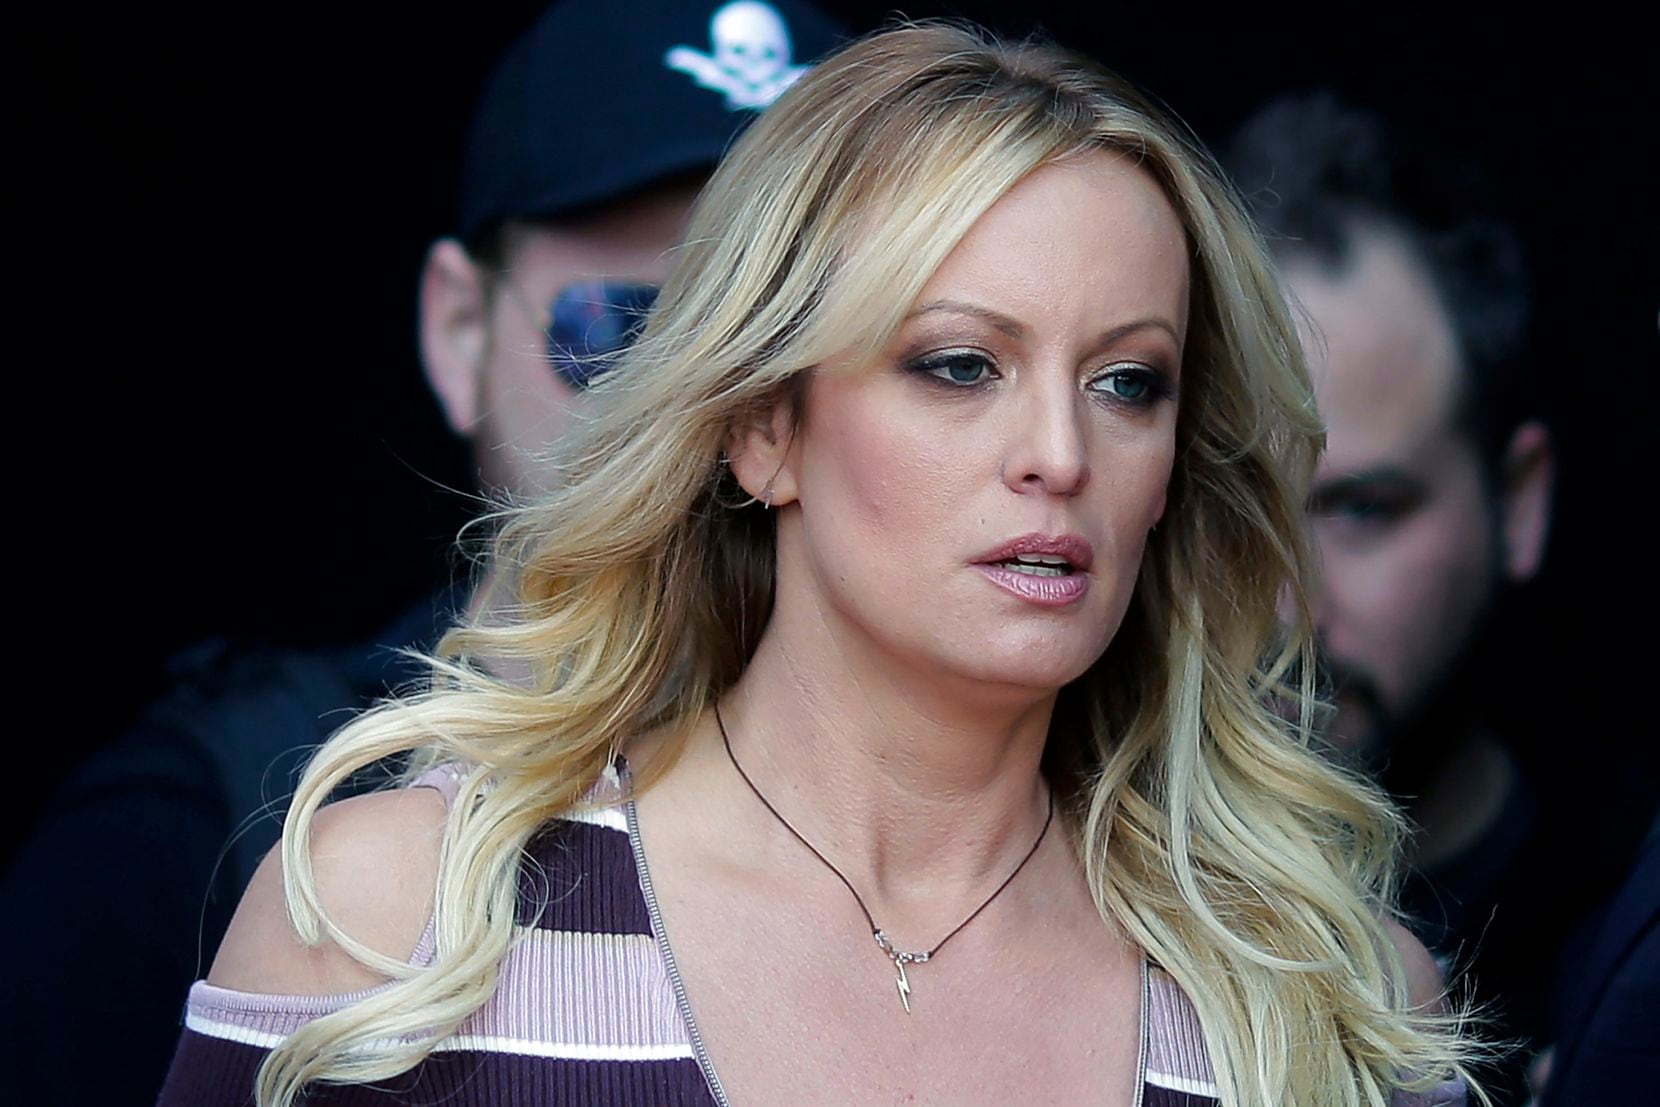 Starmi Danieals - What to know about Stormy Daniels and her ties to North Texas